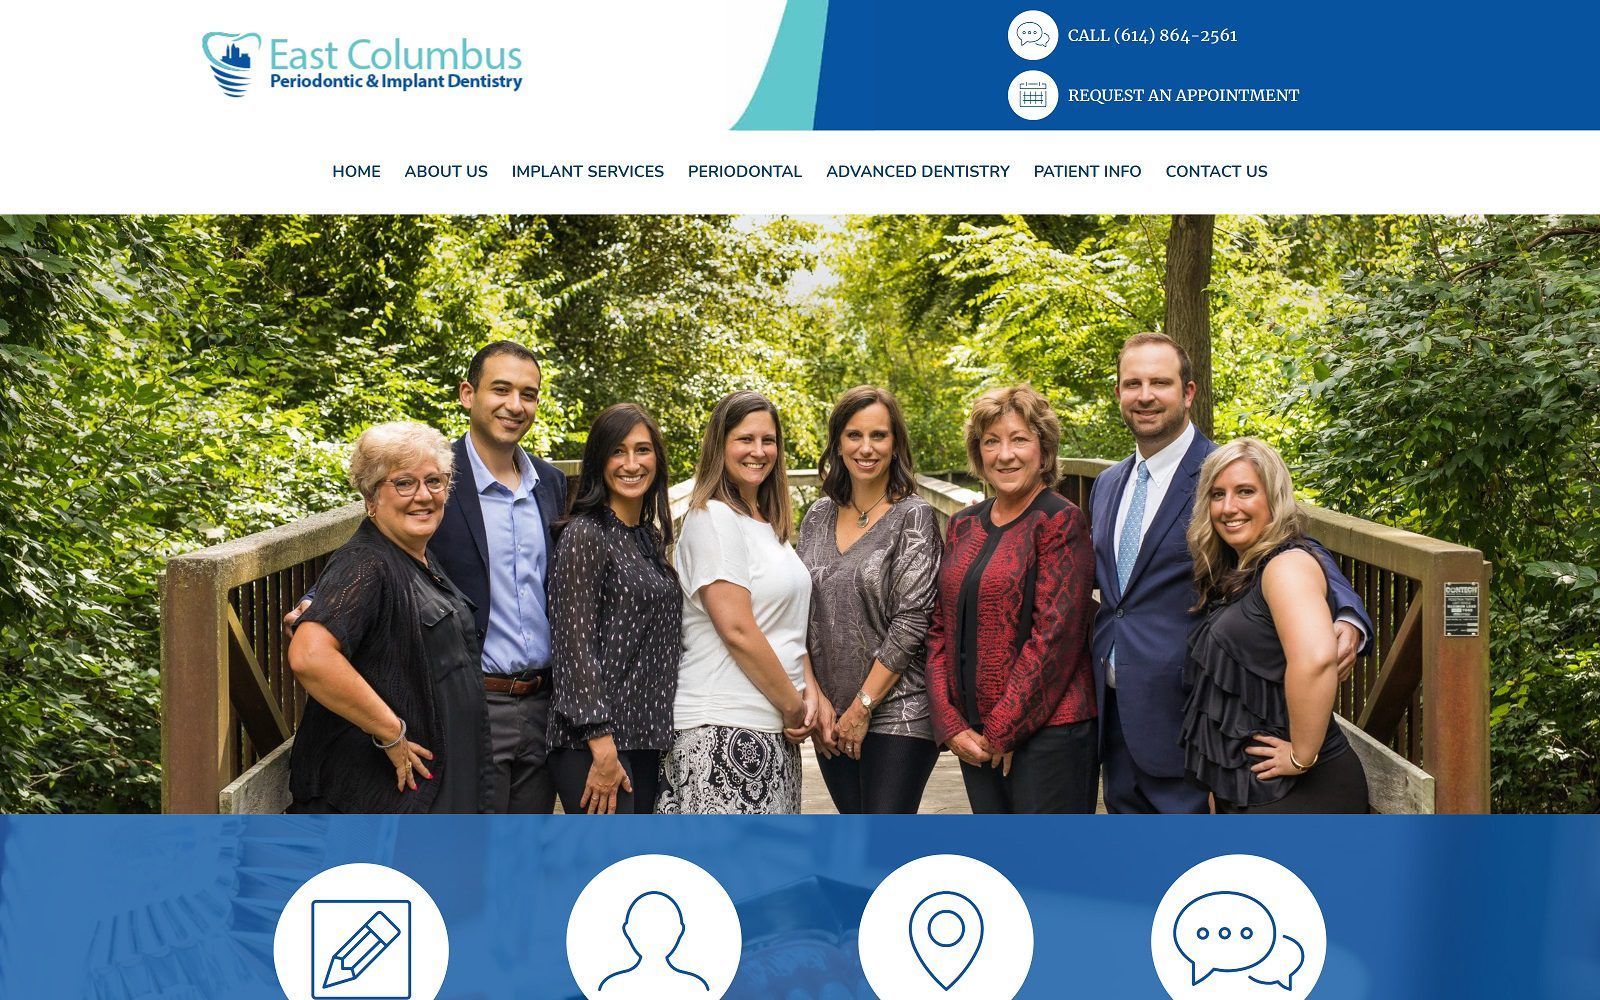 The Screenshot of East Columbus Periodontic & Implant Dentistry [Formerly Blank & Levy] Website